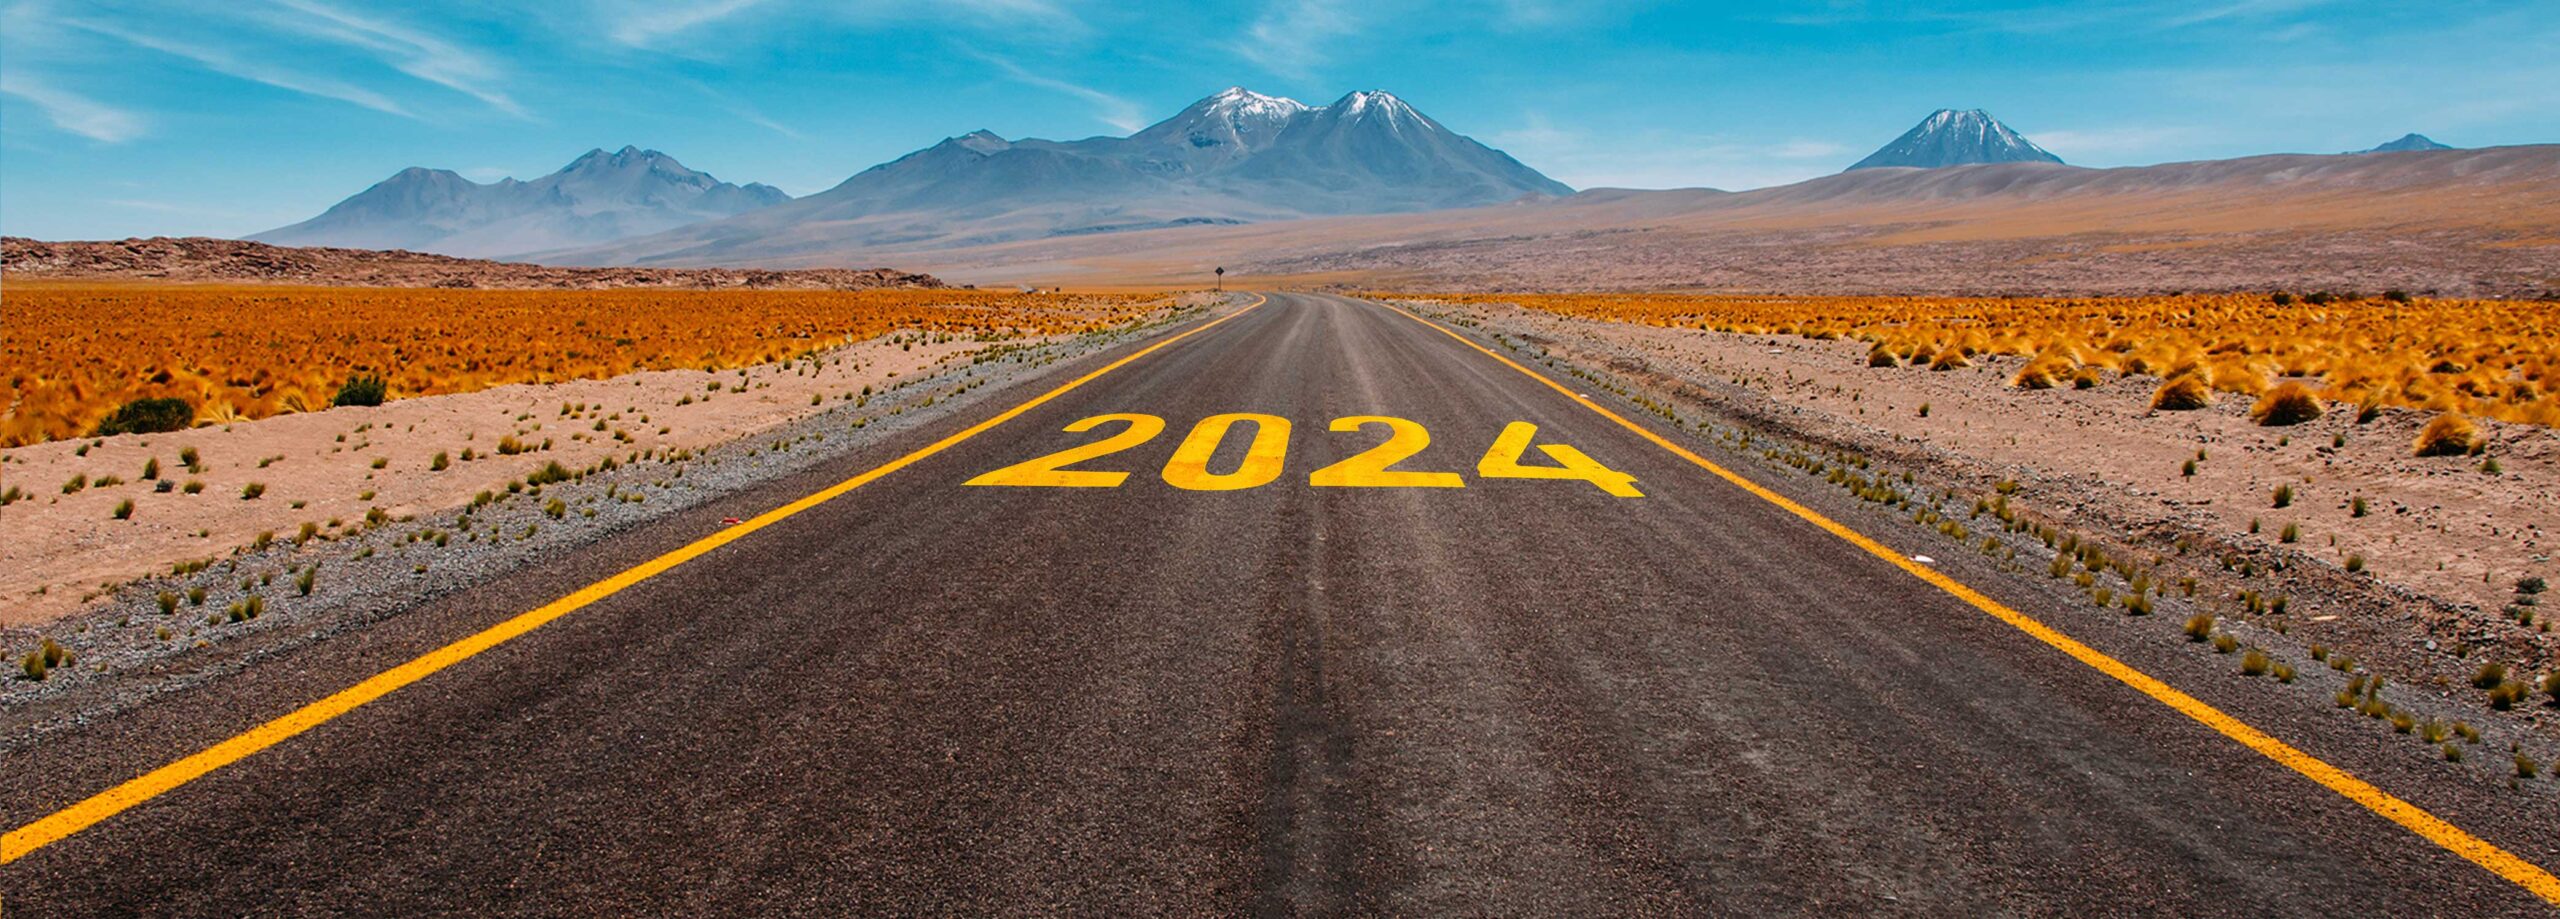 Road to 2024